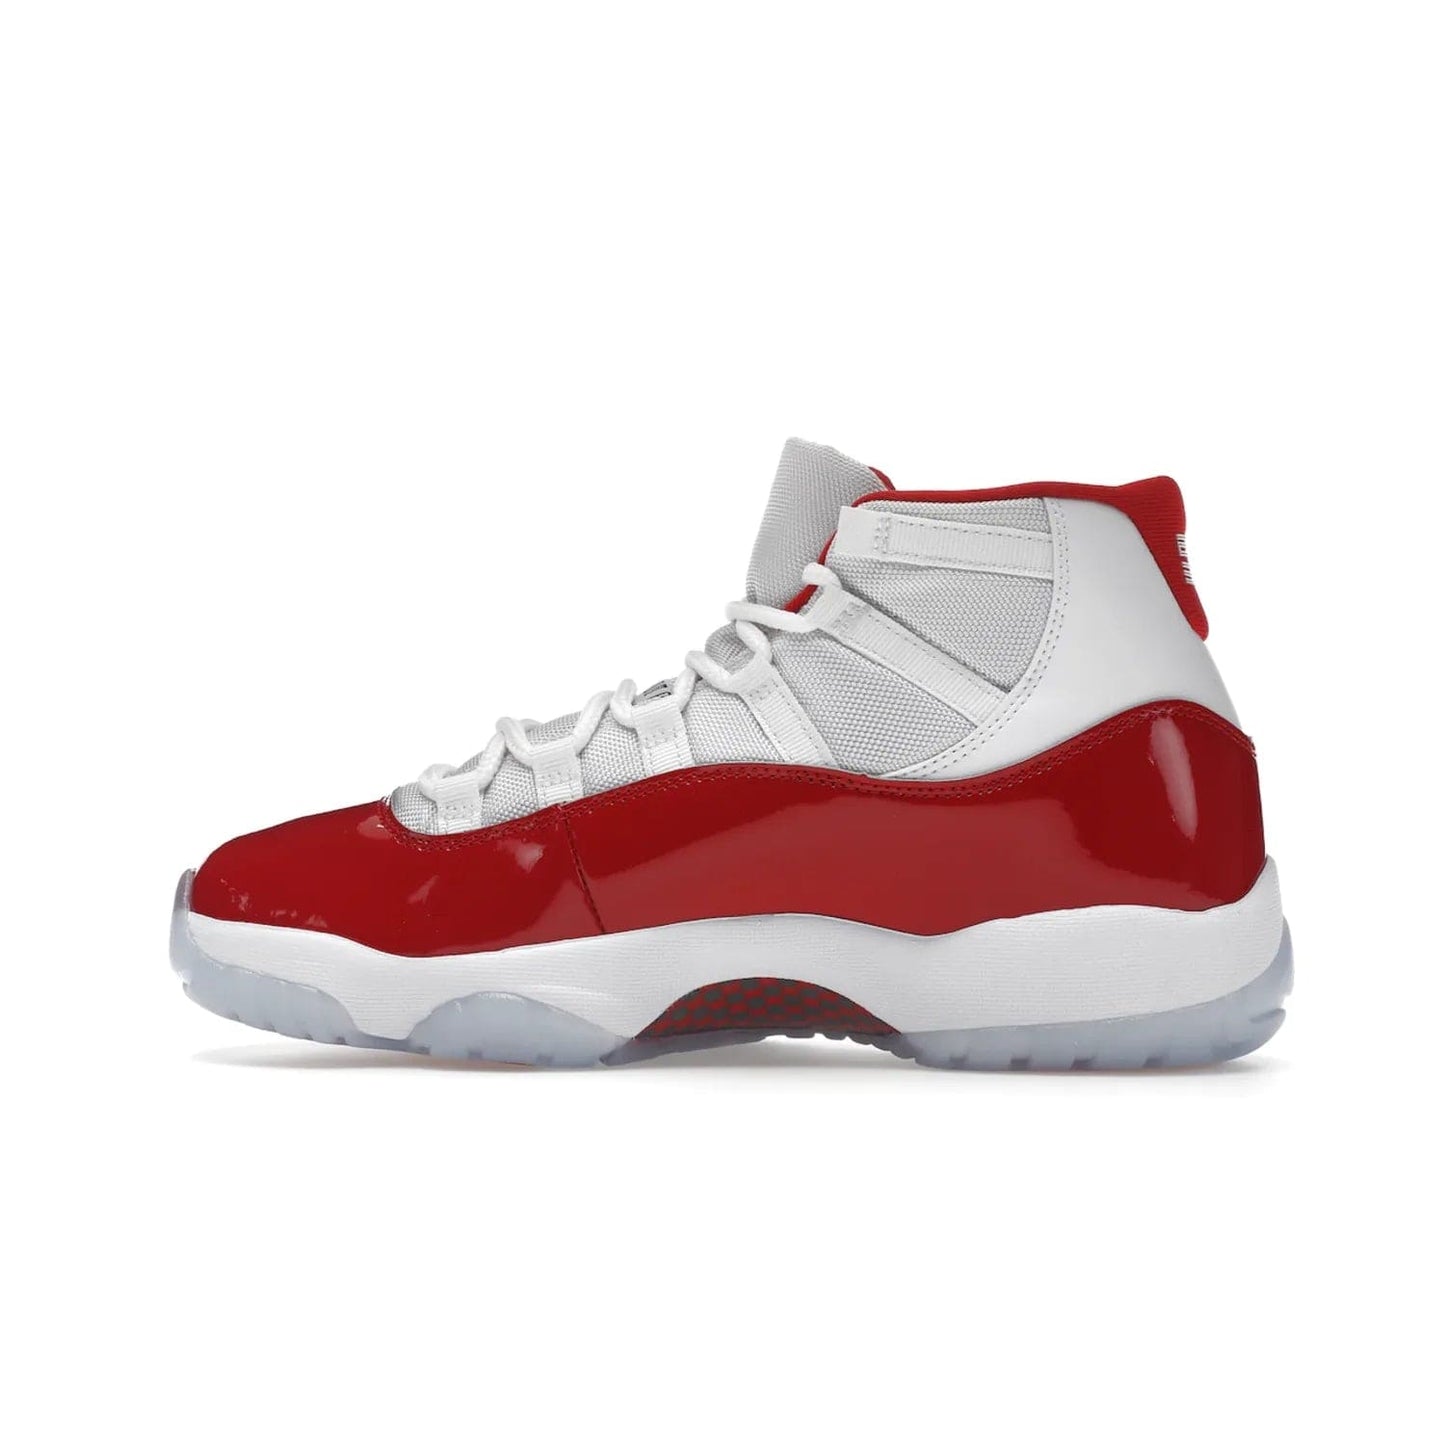 Jordan 11 Retro Cherry (2022) - Image 20 - Only at www.BallersClubKickz.com - The Air Jordan 11 Cherry features classic patent leather with Cherry red accents, icy blue outsole, and debossed 23 on the heel tab. Refresh your sneaker game with this iconic update, available December 10, 2022.